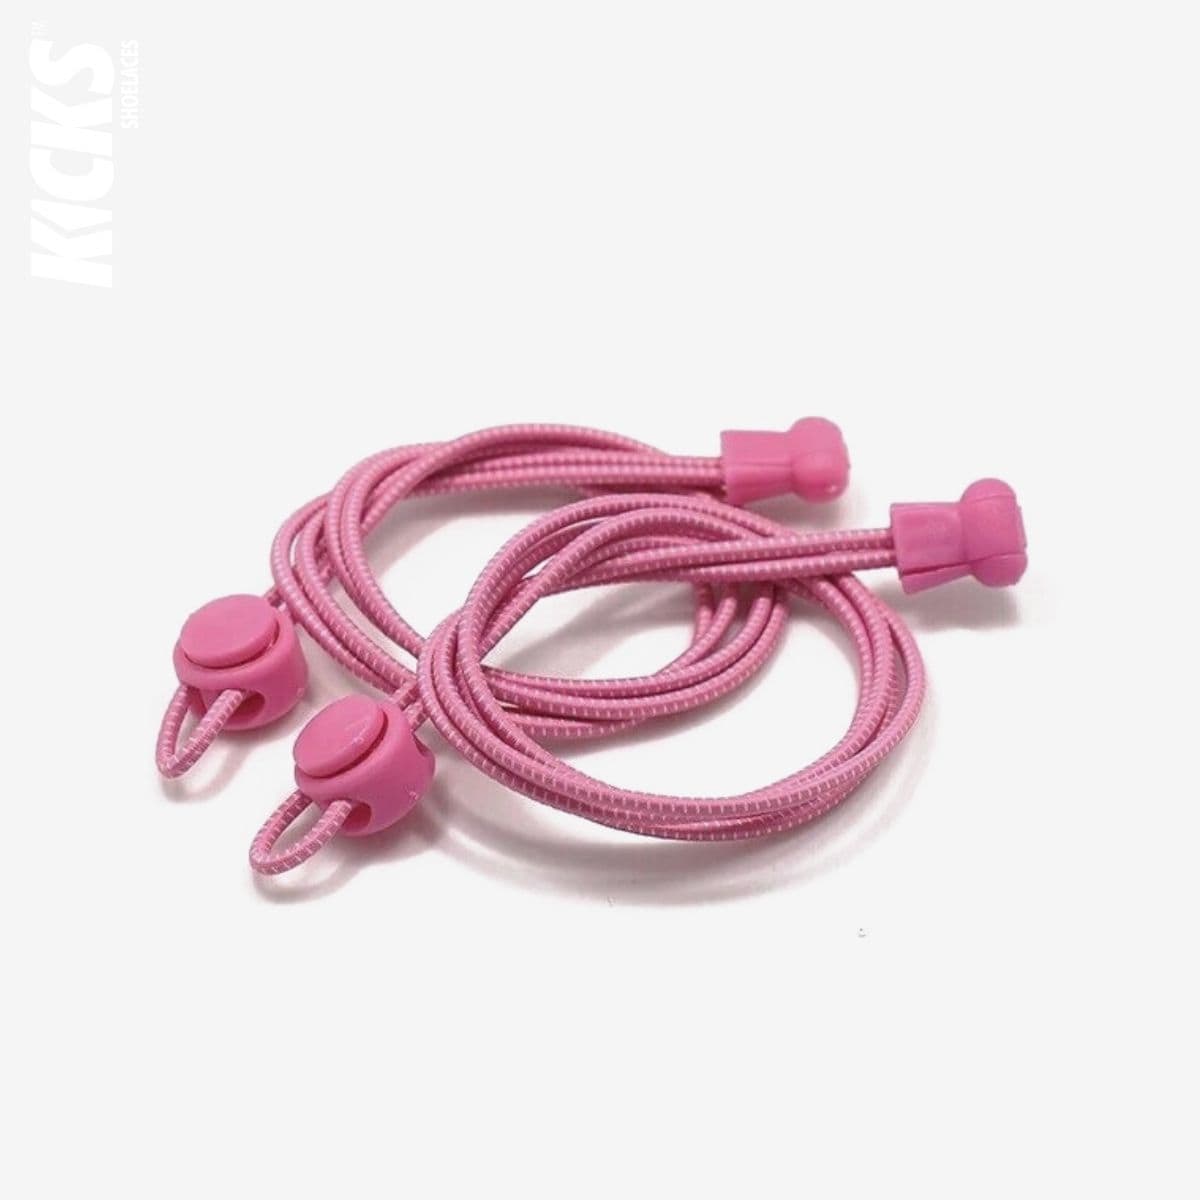 pink-no-tie elastic-running-shoelaces-with-matching-lace-locks-by-kicks-shoelaces